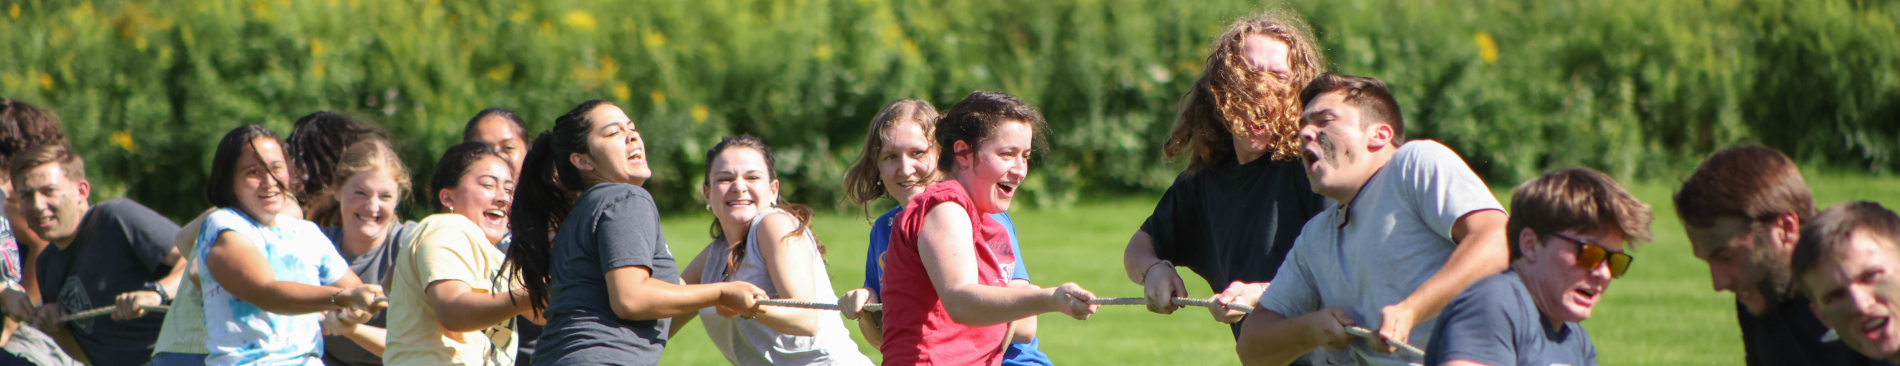 A group of smiling students playing tug of war.